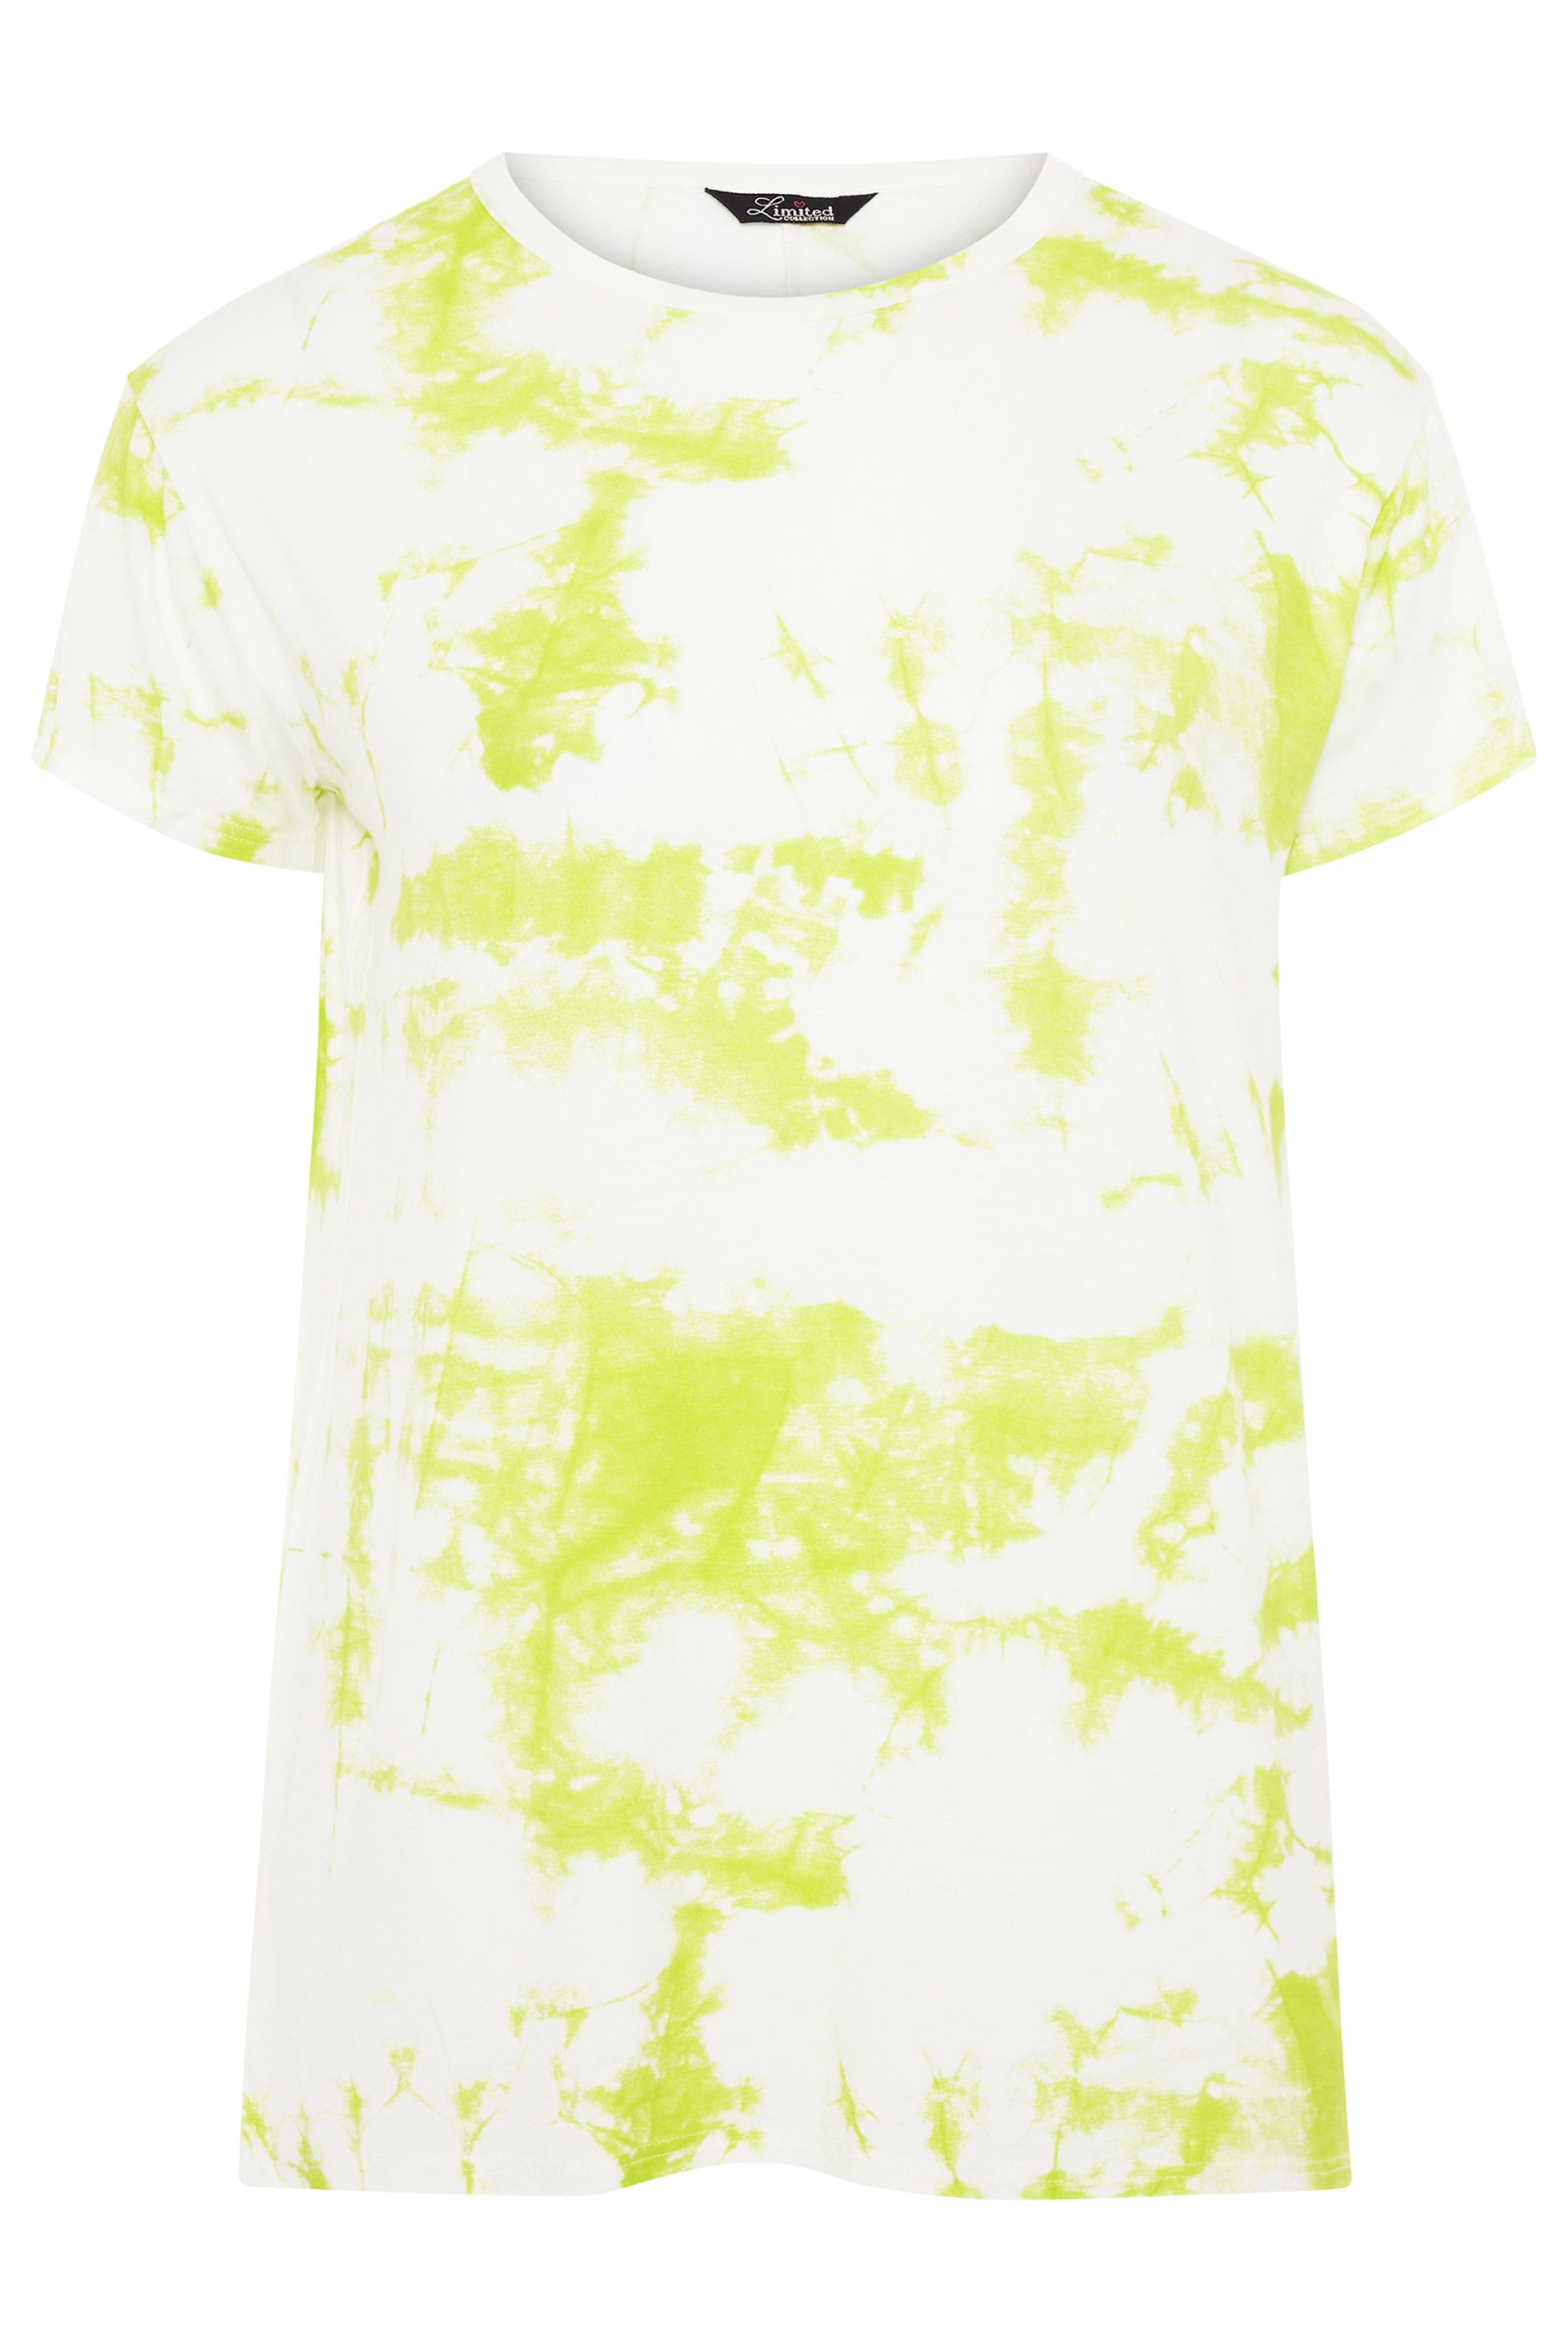 LIMITED COLLECTION Lime Green Tie Dye T-Shirt | Yours Clothing